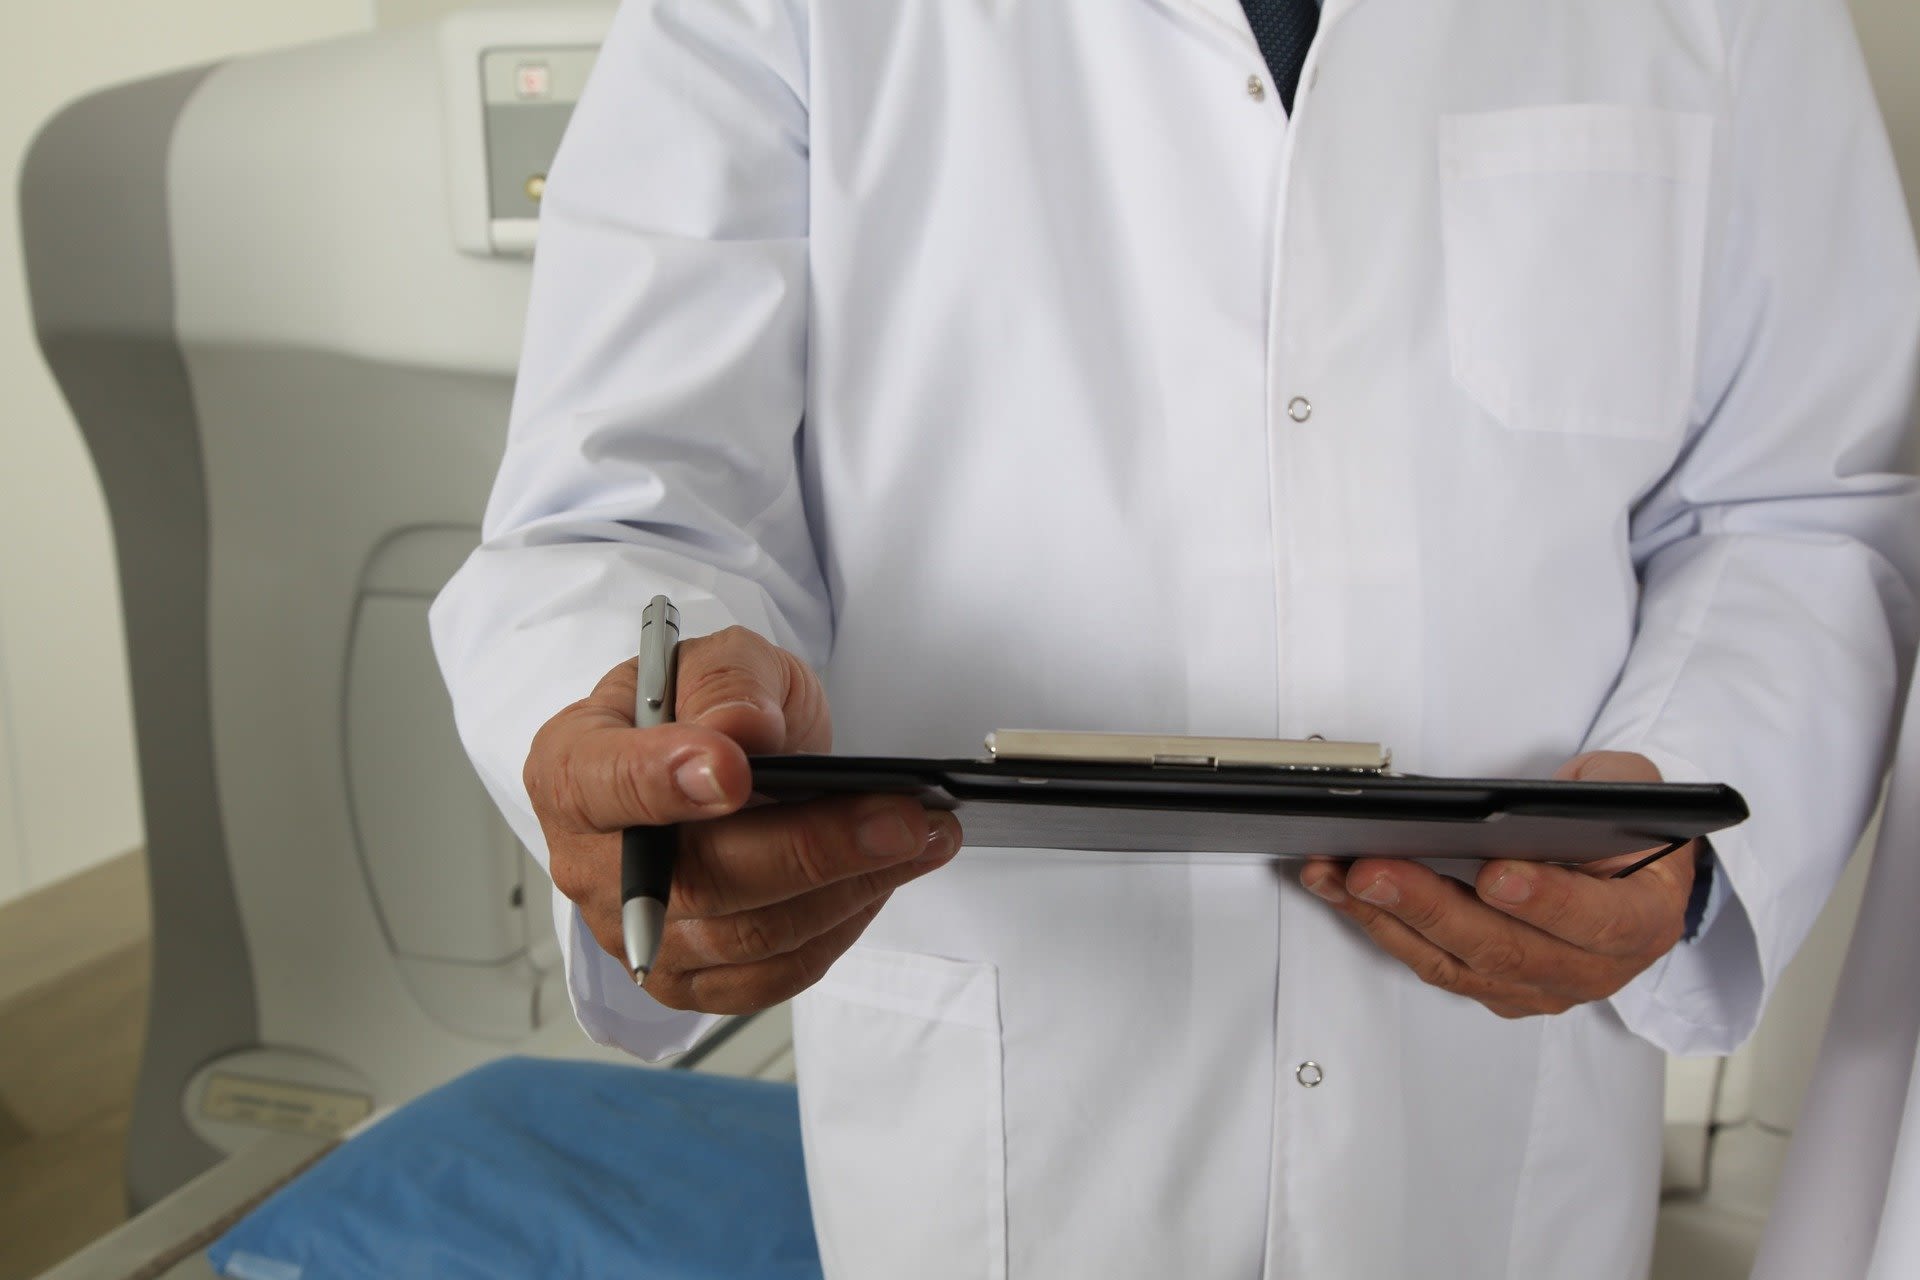 Virtual scribes reduce physicians' time spent on electronic health records